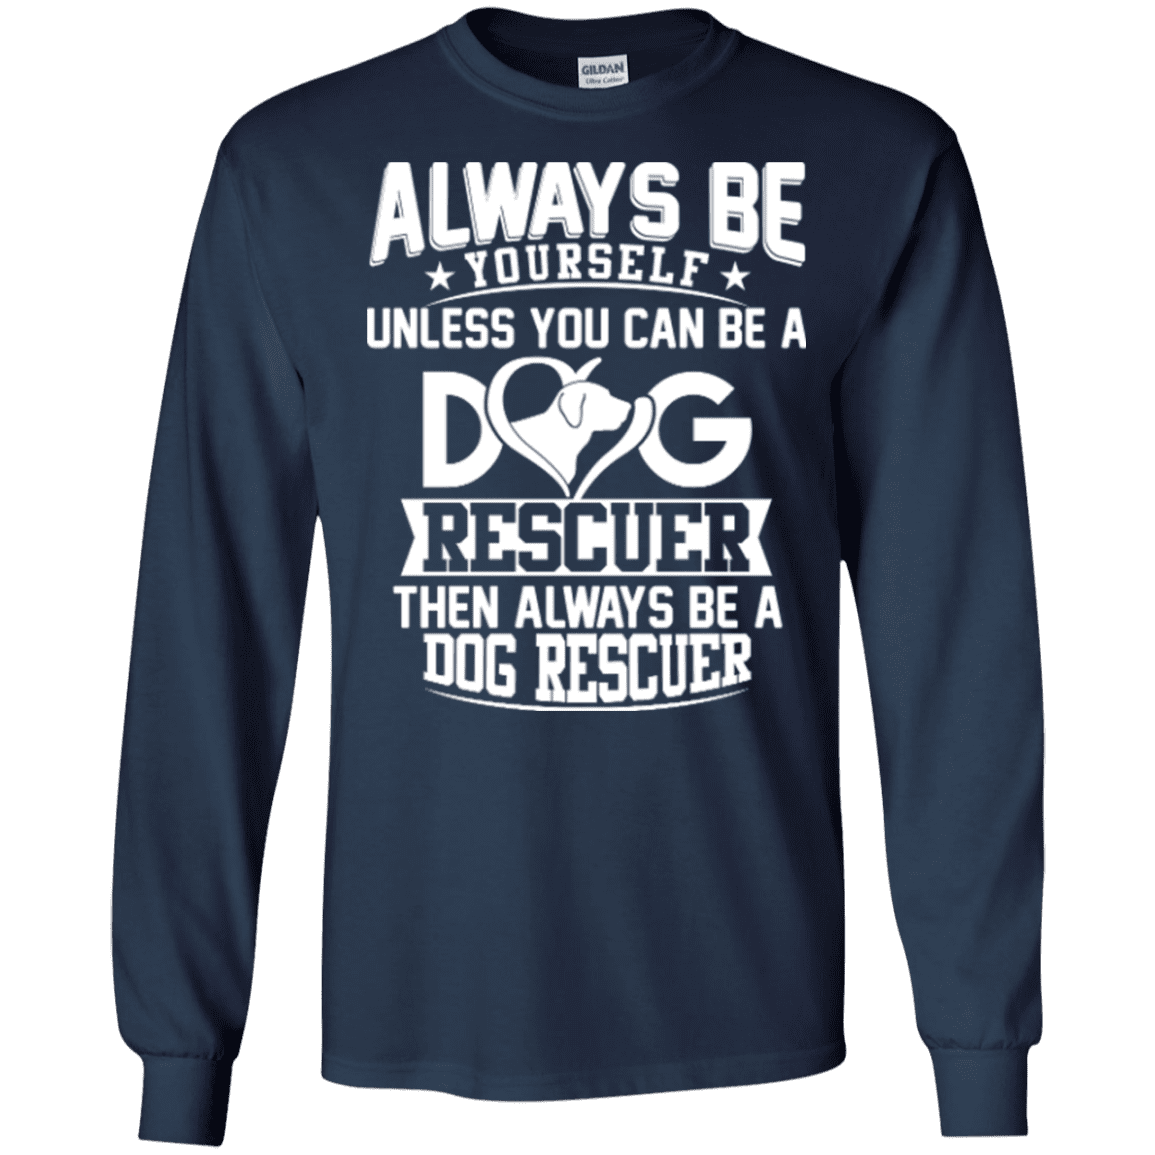 Always Be A Dog Rescuer - Long Sleeve T Shirt.